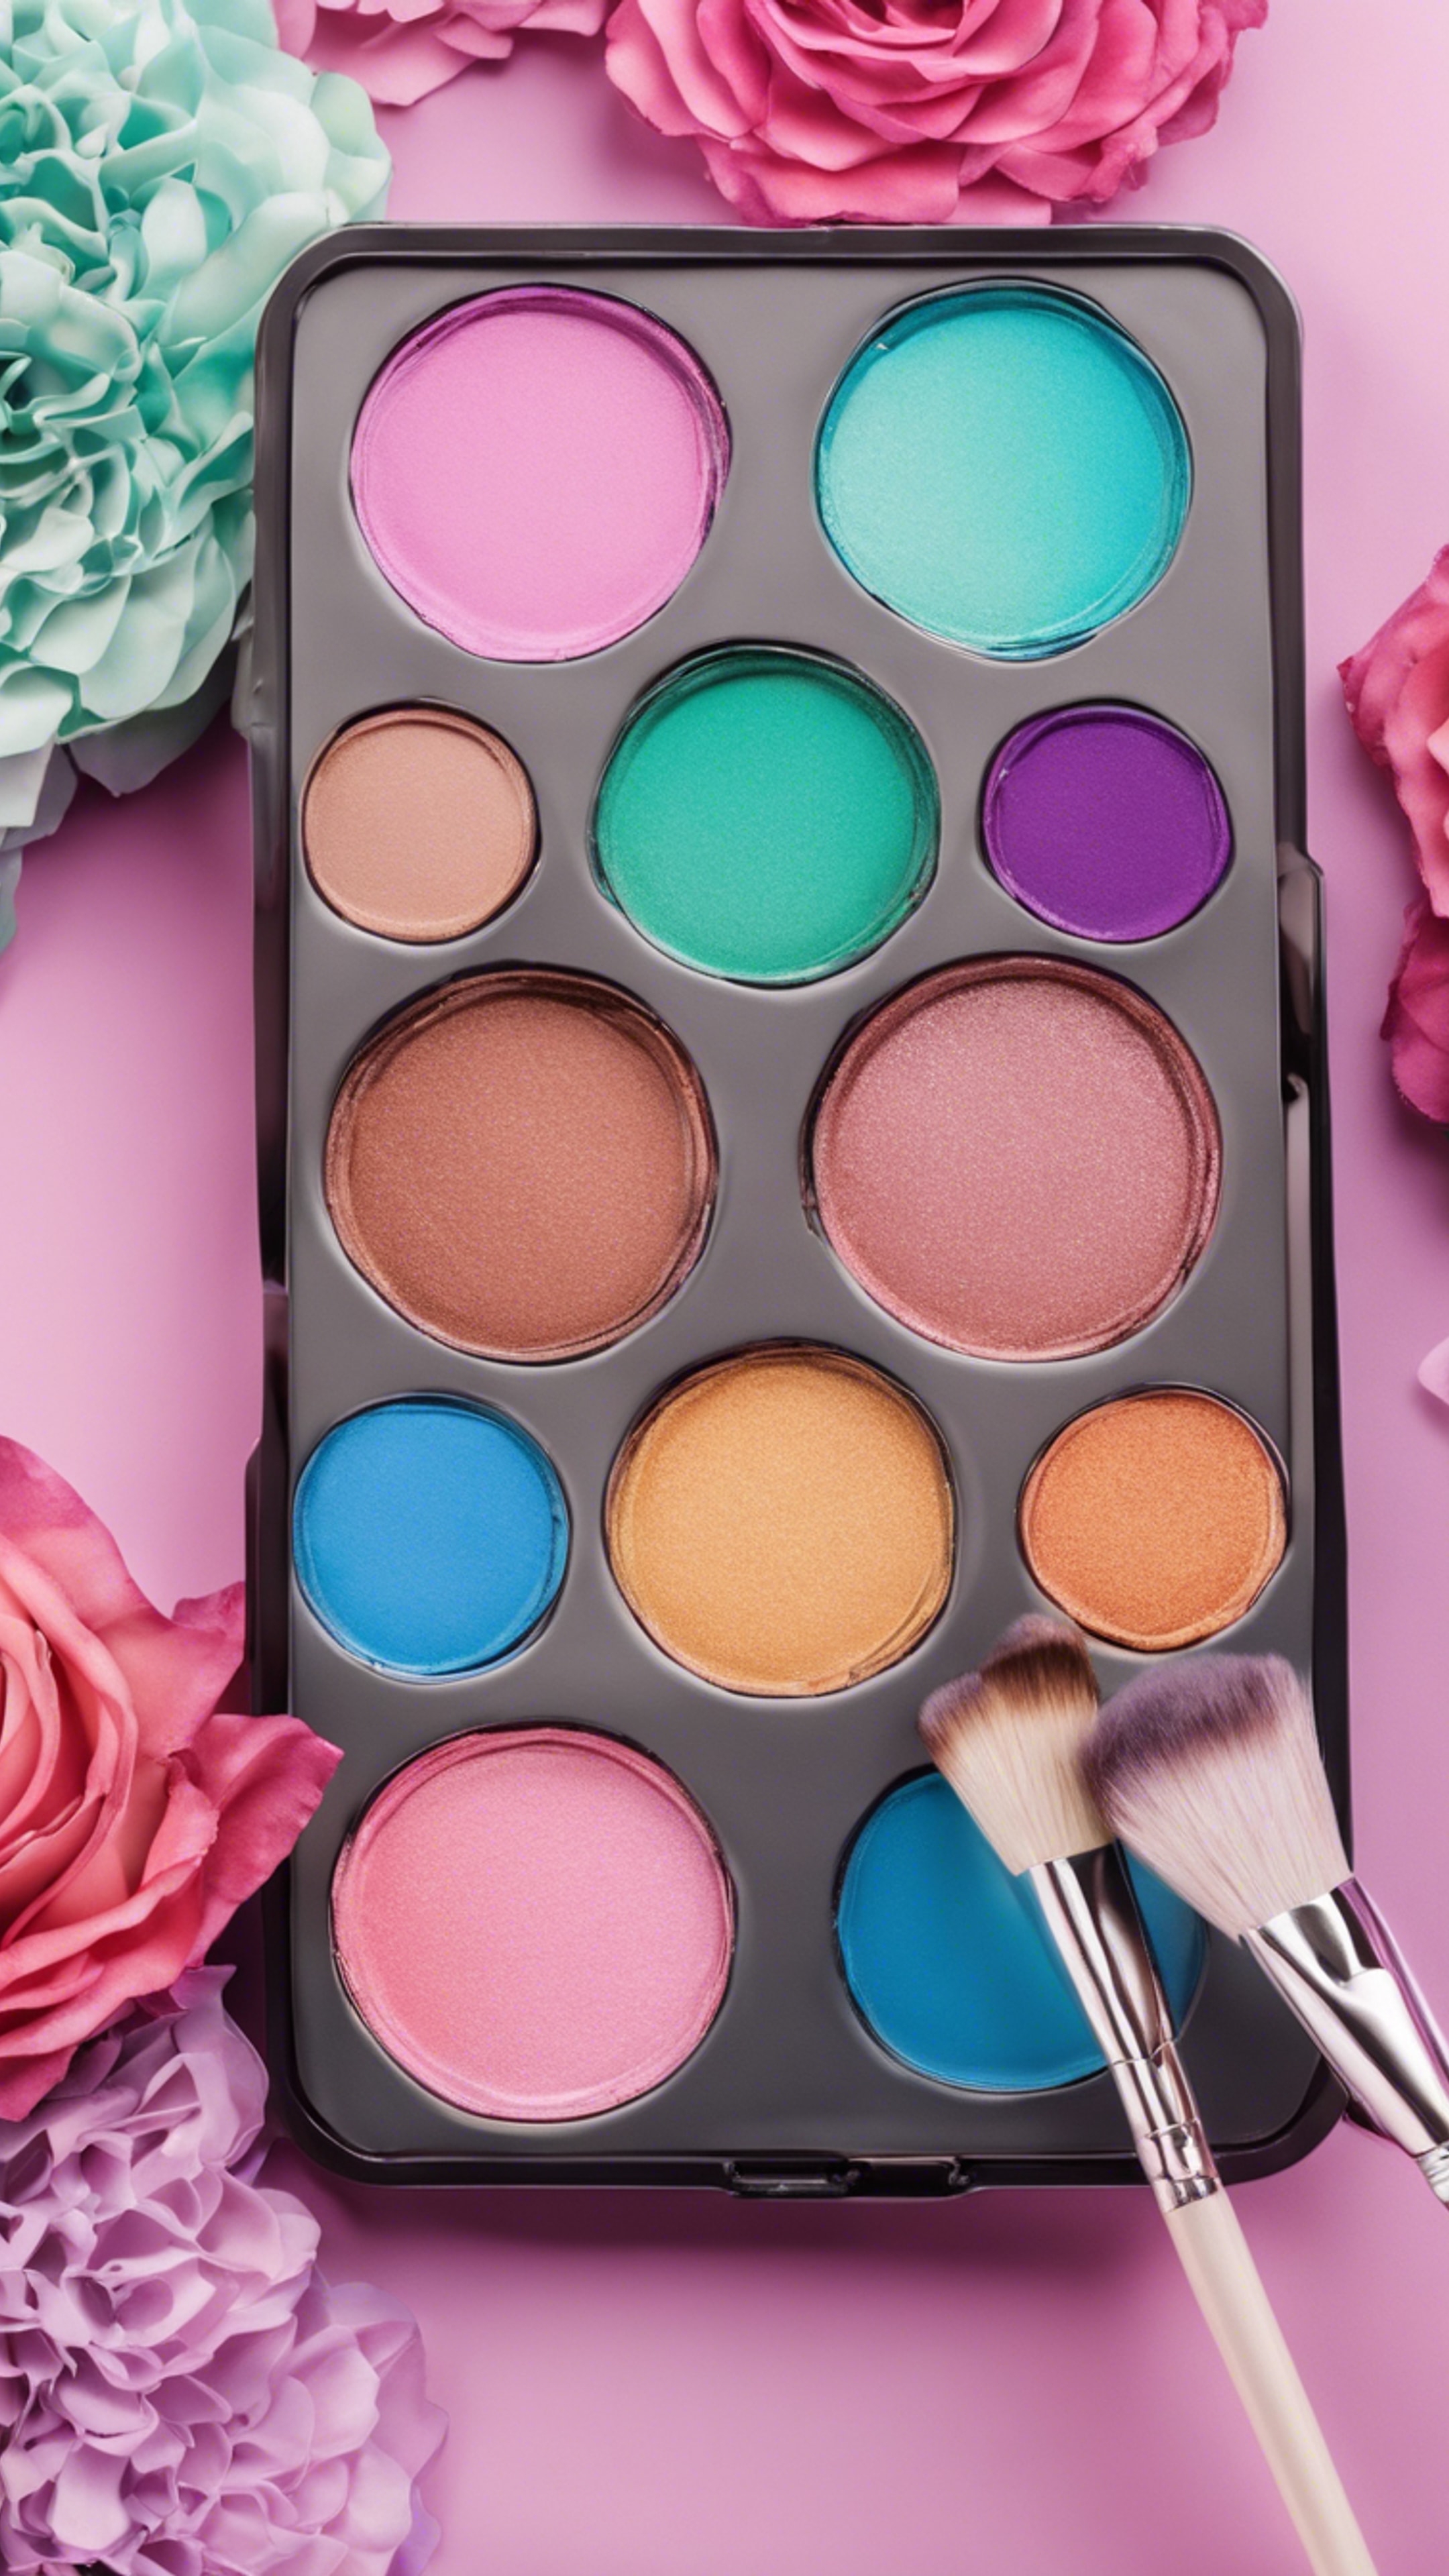 A cute girly makeup palette with a variety of vibrant colors and a brush for application. Wallpaper[6f3ccf3758d549978770]